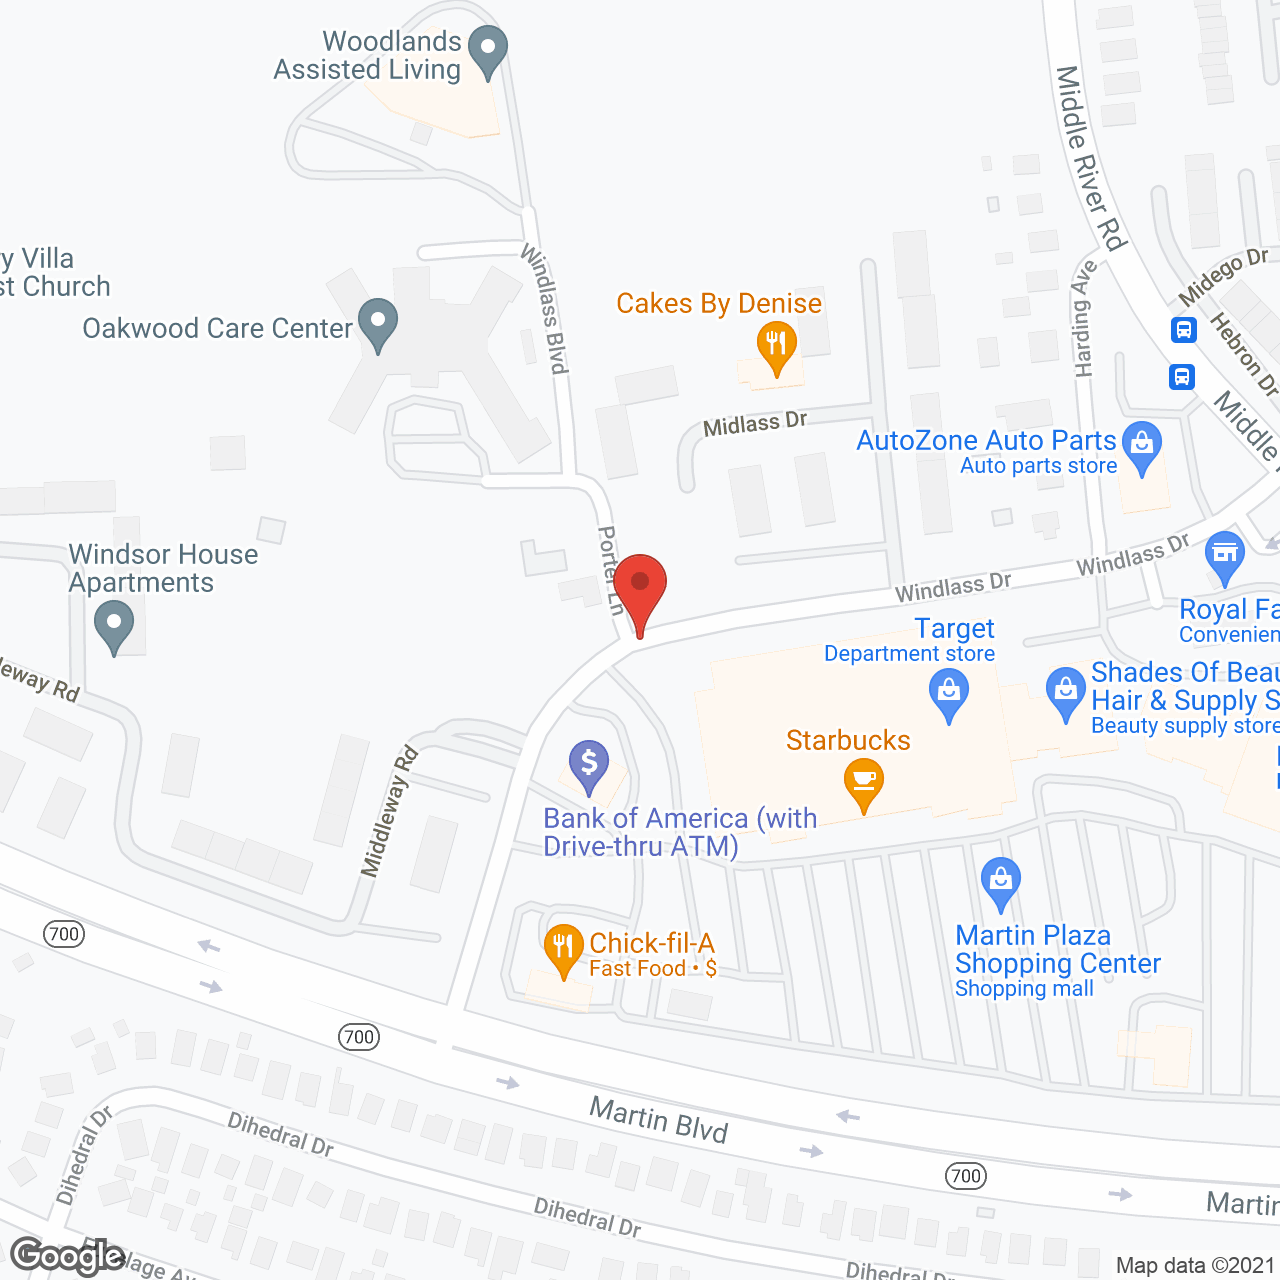 Woodlands Assisted Living in google map